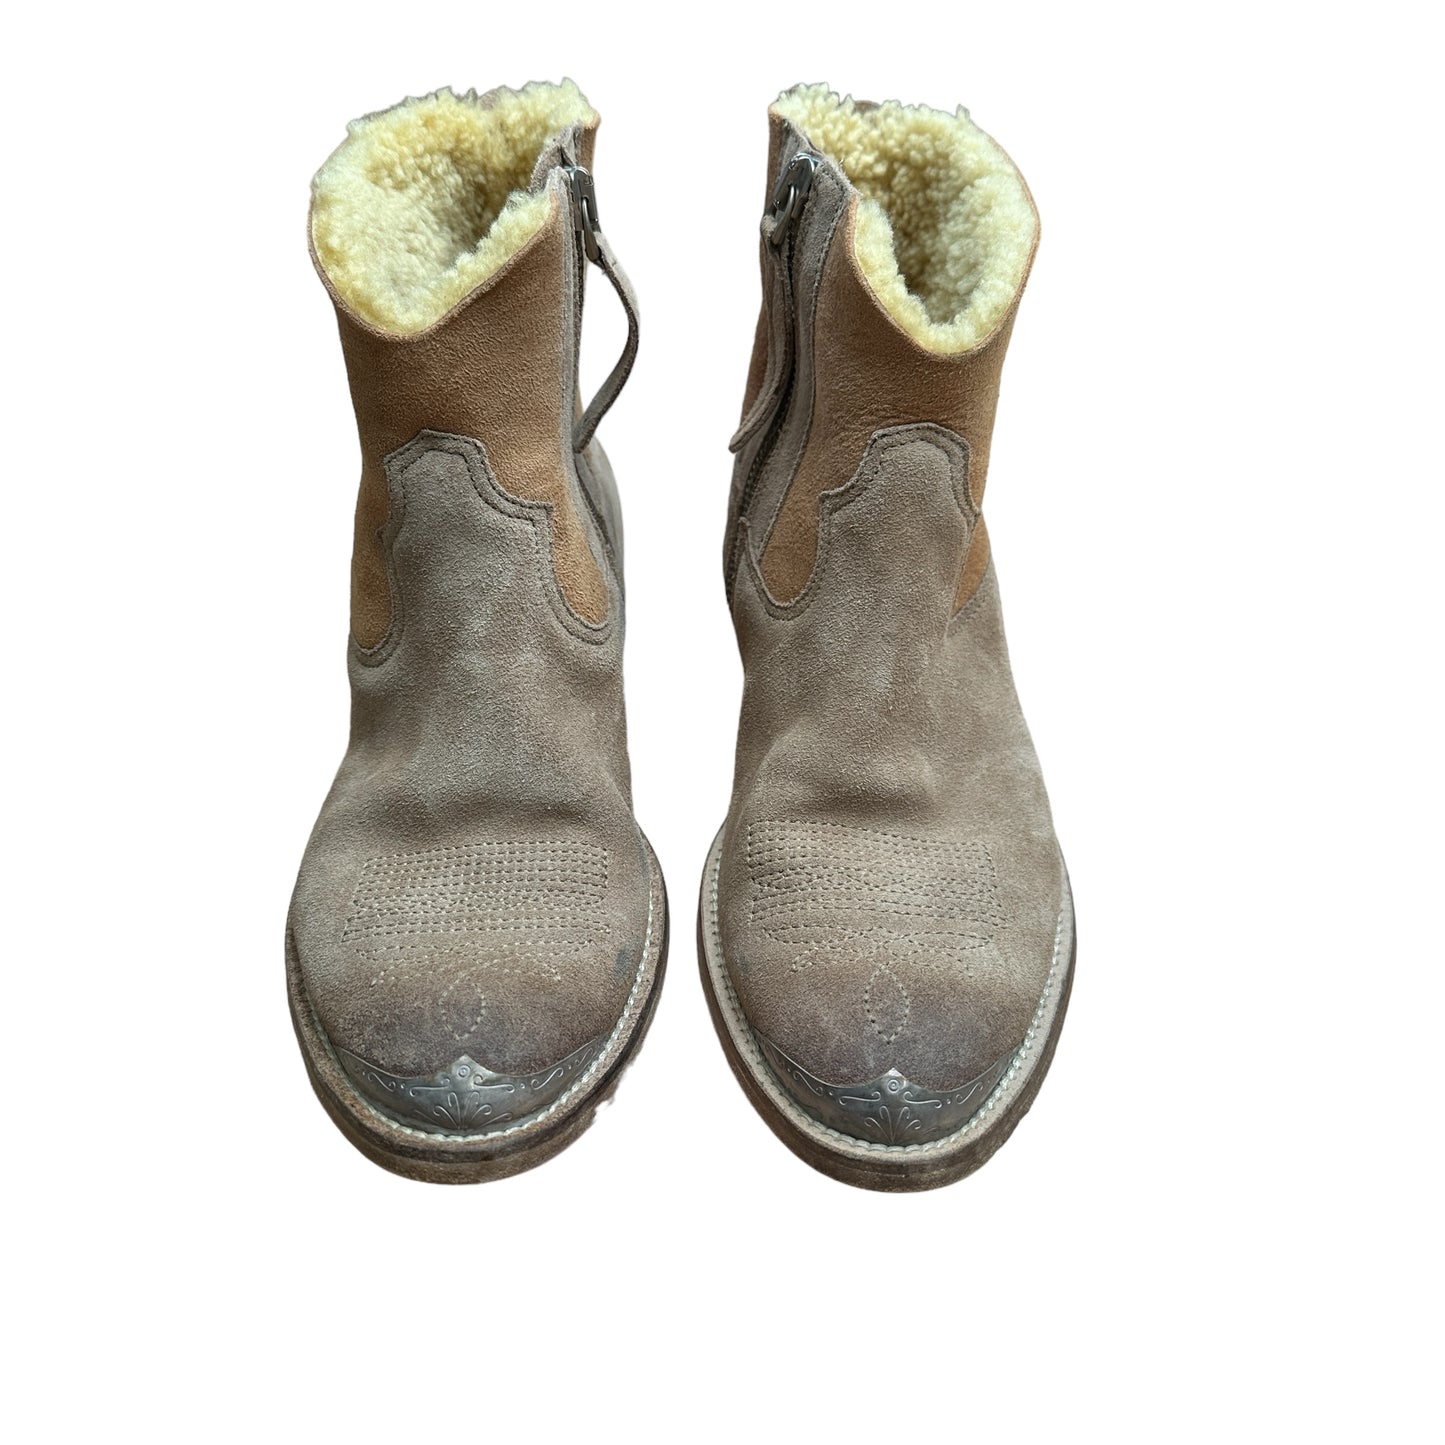 Suede & Shearling Boots - 7